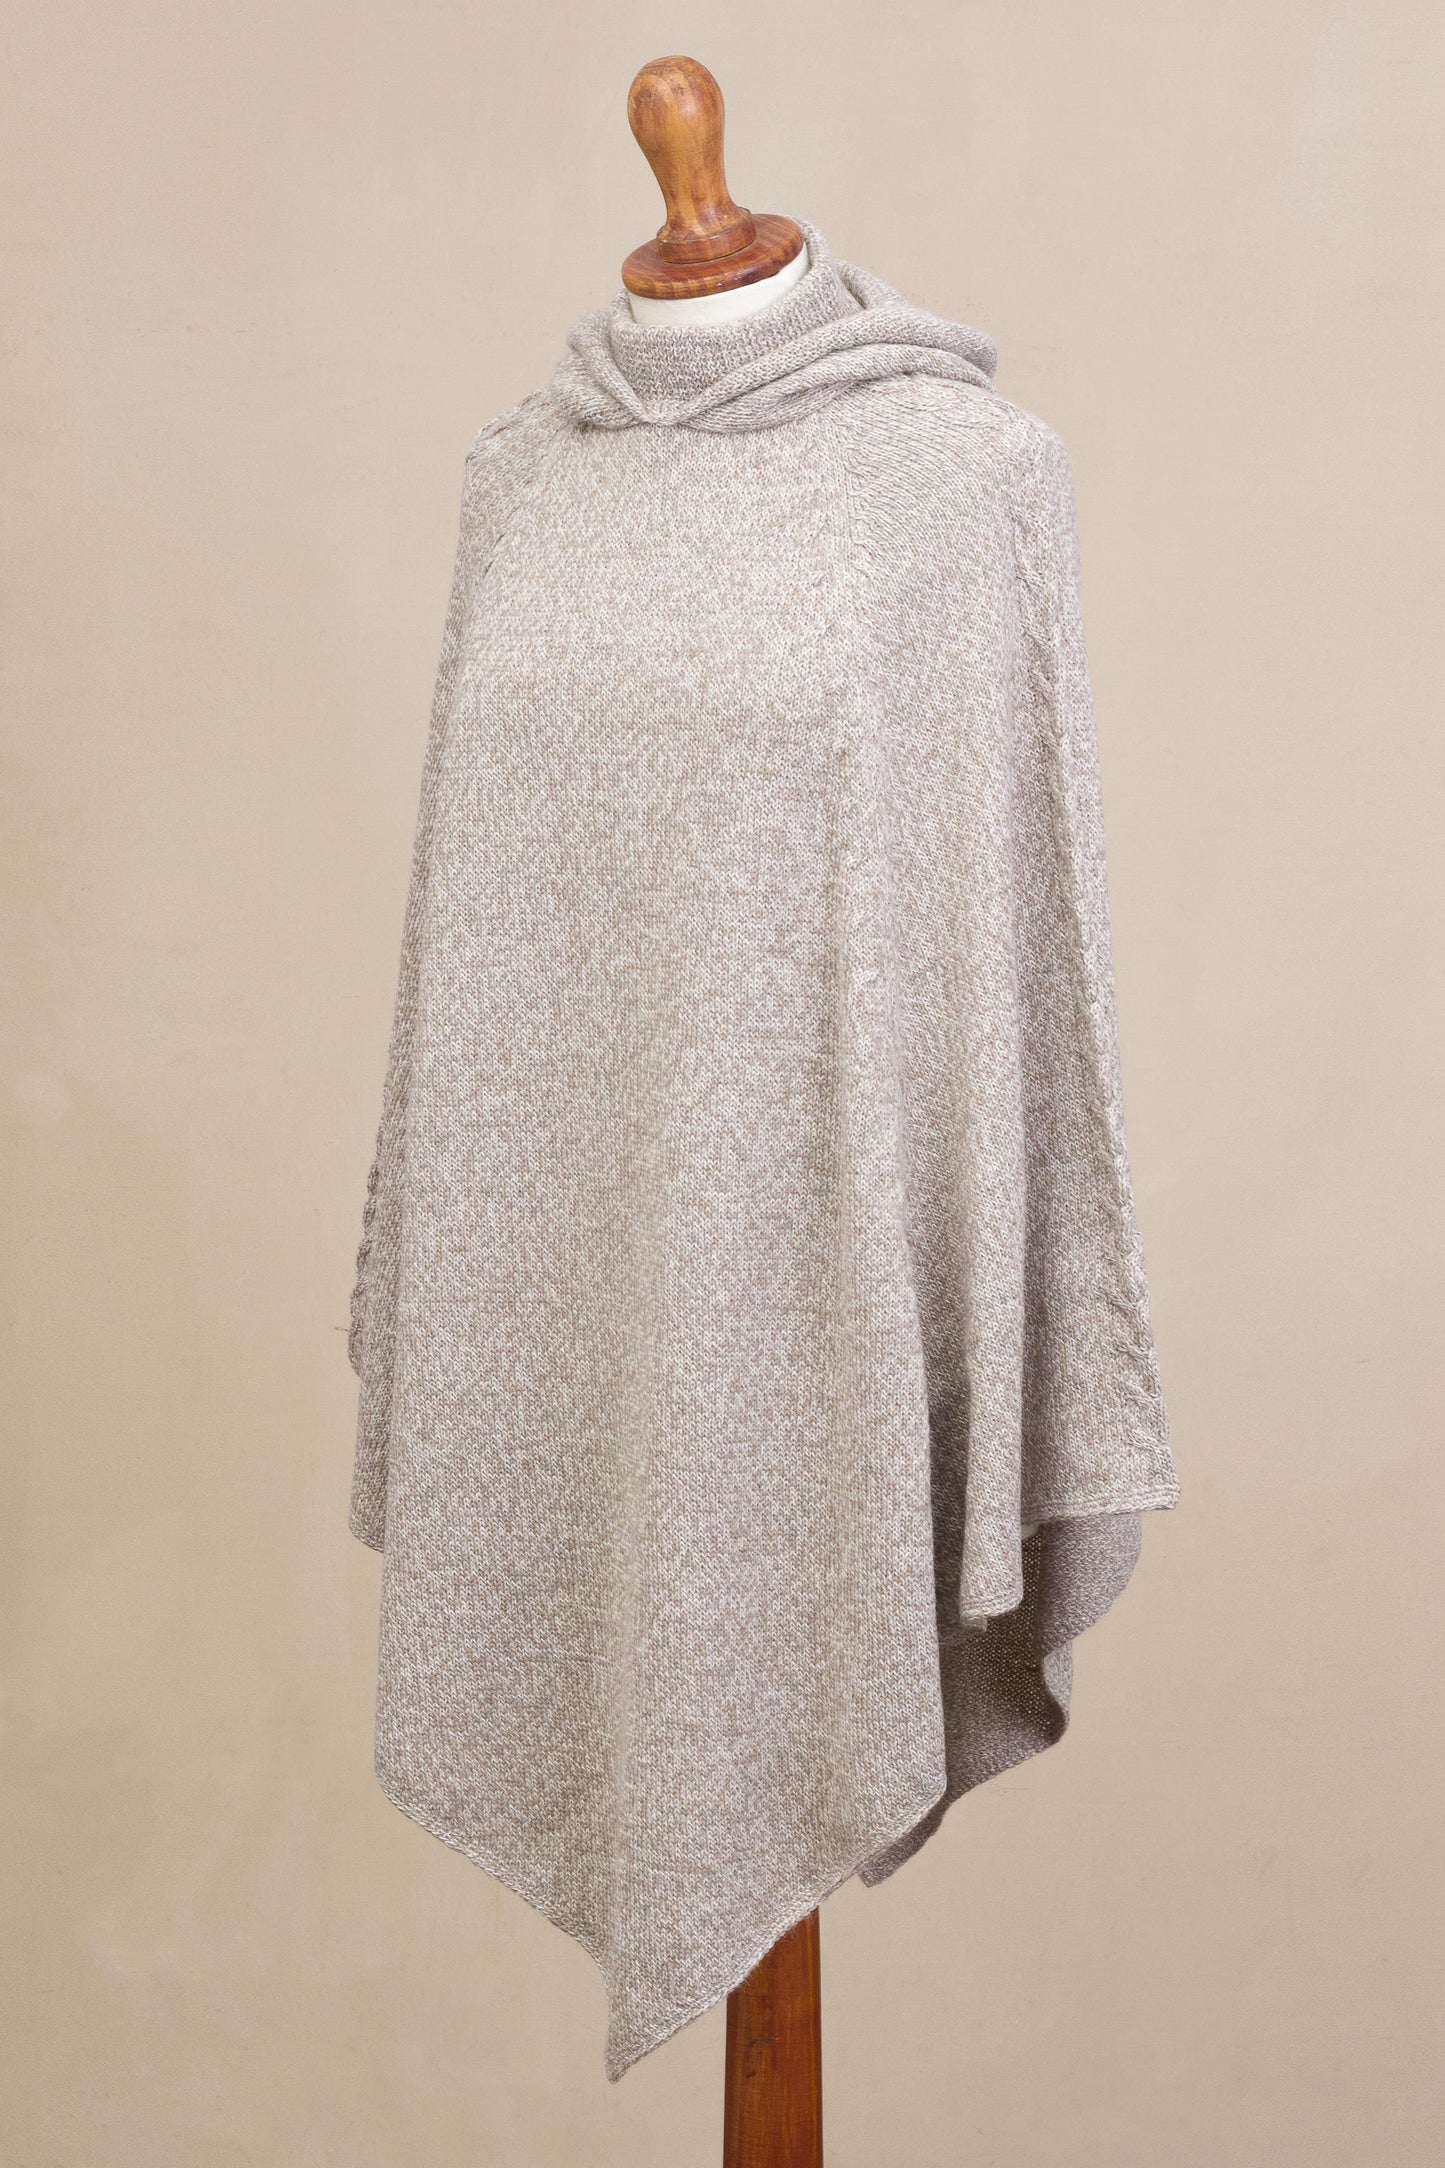 Adventurous Style in Taupe Knit Alpaca Blend Hooded Poncho in Taupe from Peru